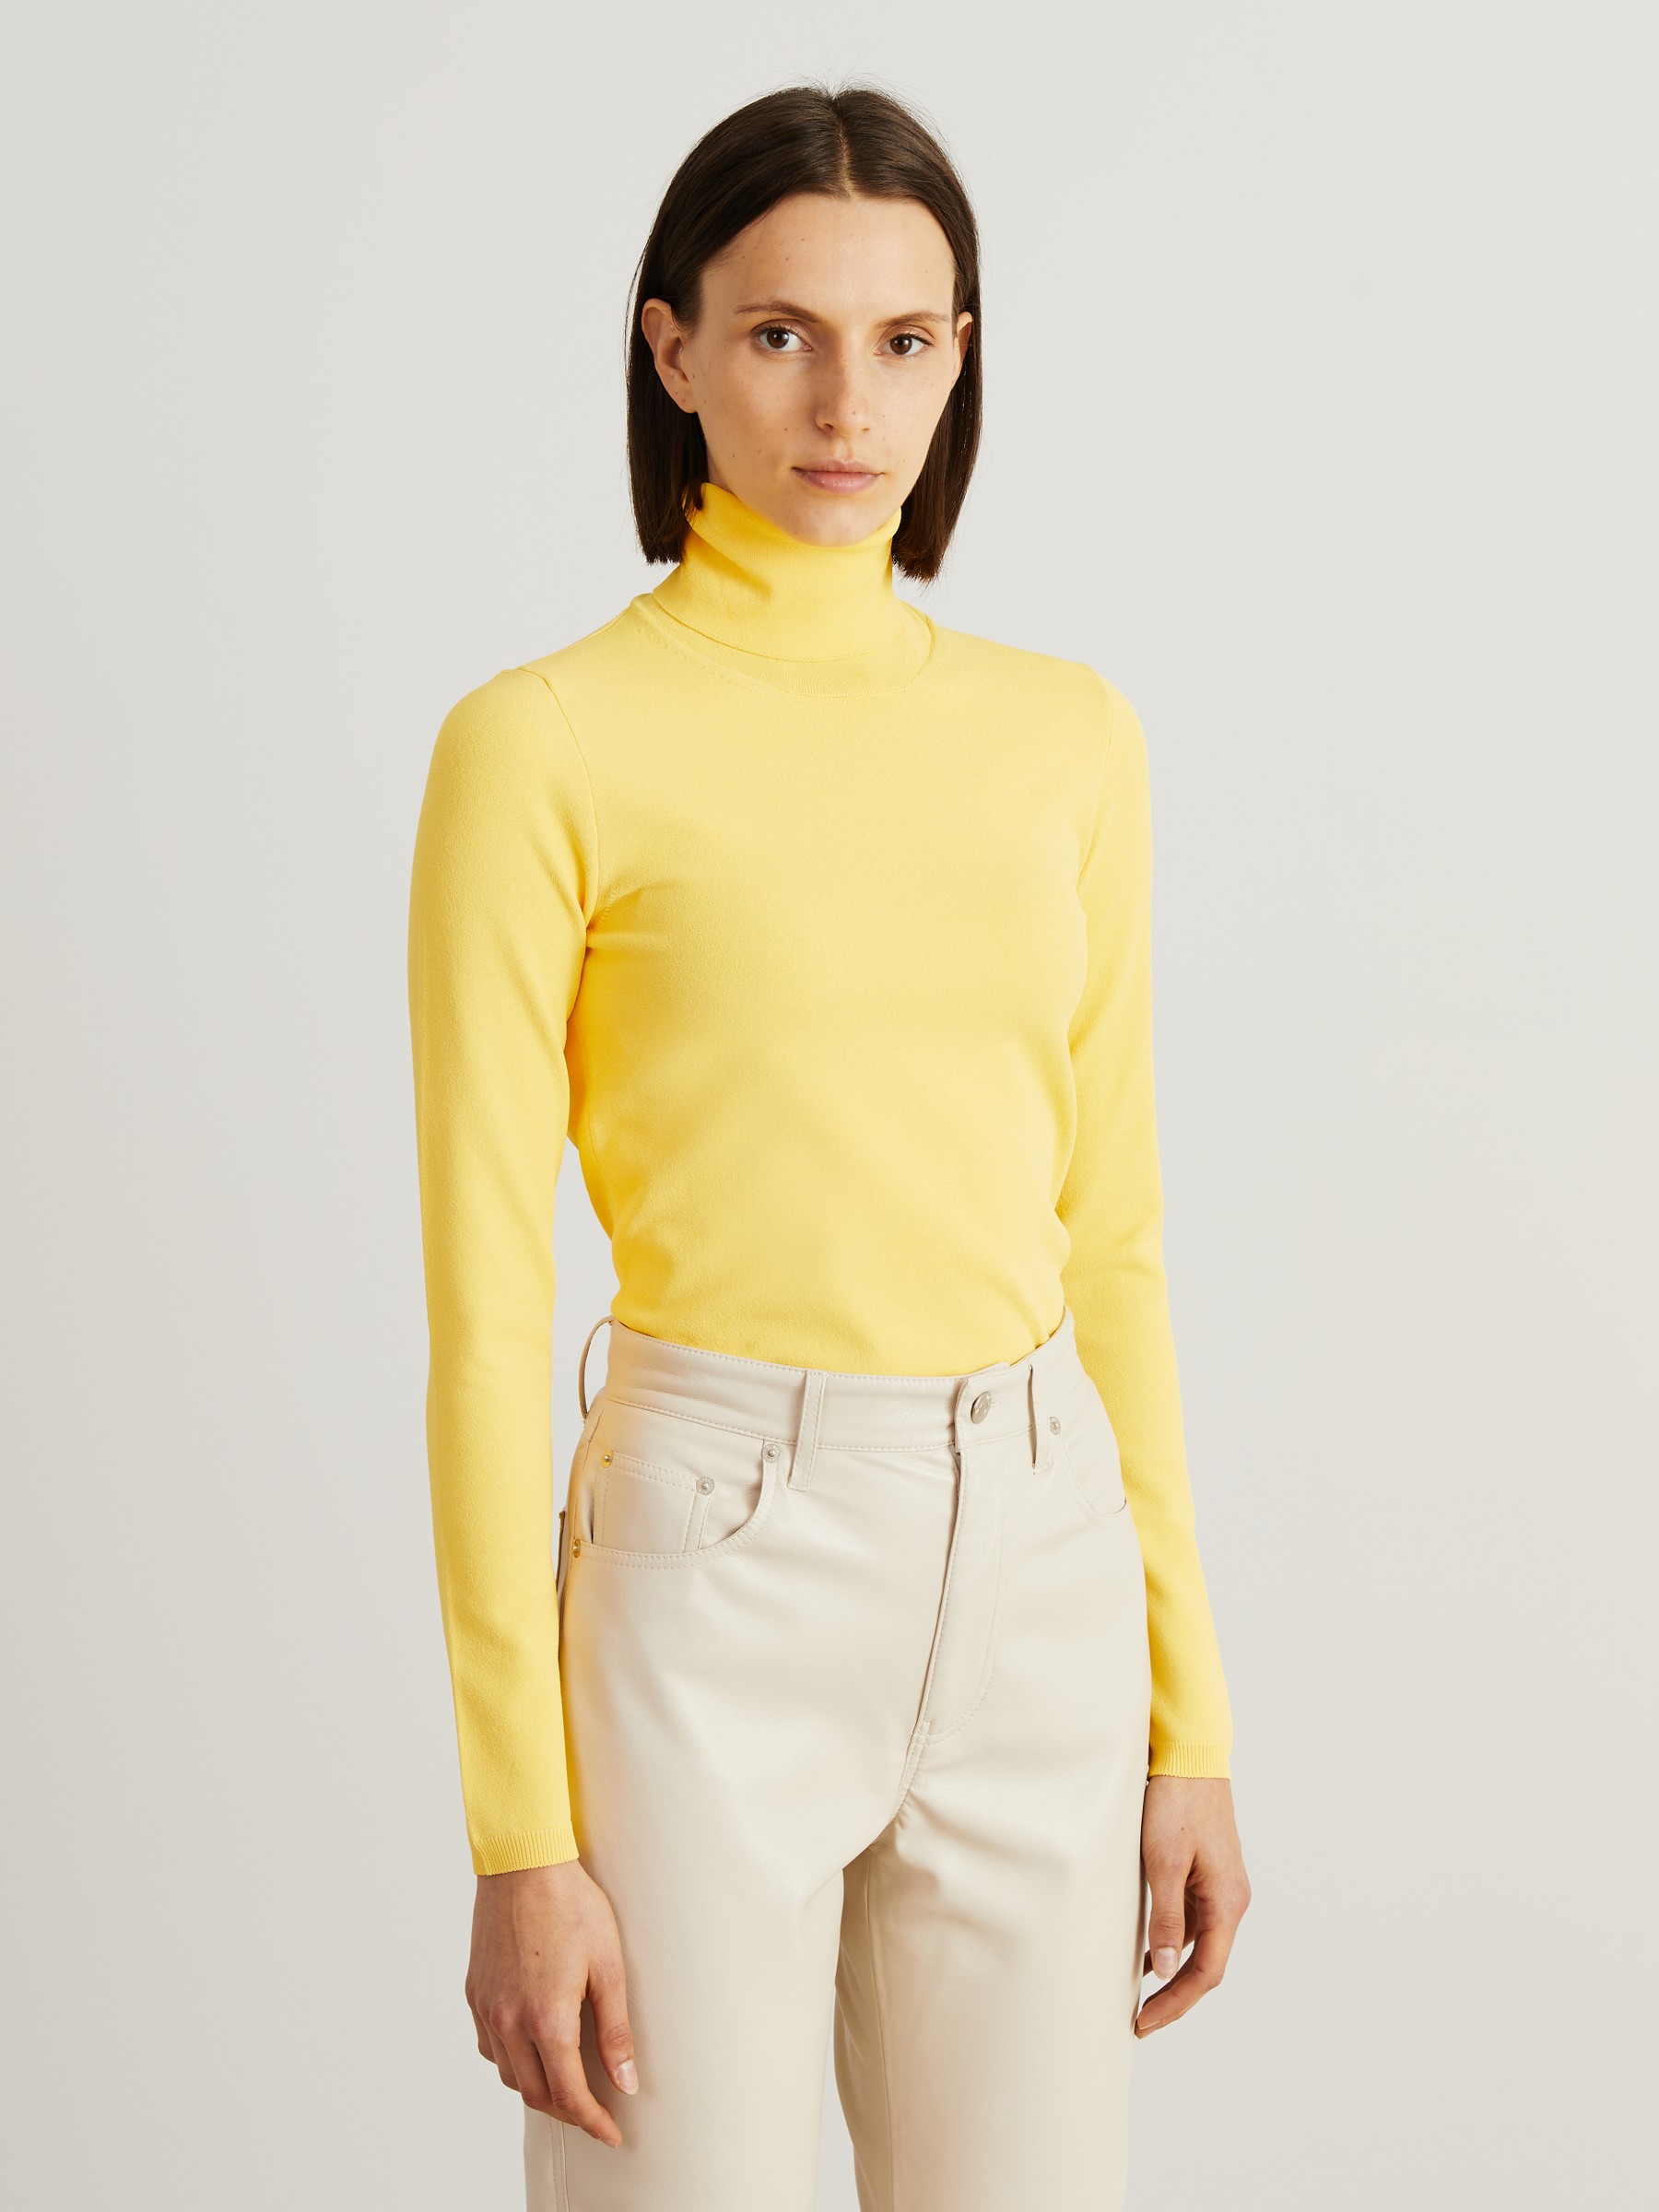 Save 63% Womens Clothing Jumpers and knitwear Turtlenecks Stella McCartney Synthetic Turtleneck Sweater In Compact Knit in Yellow 